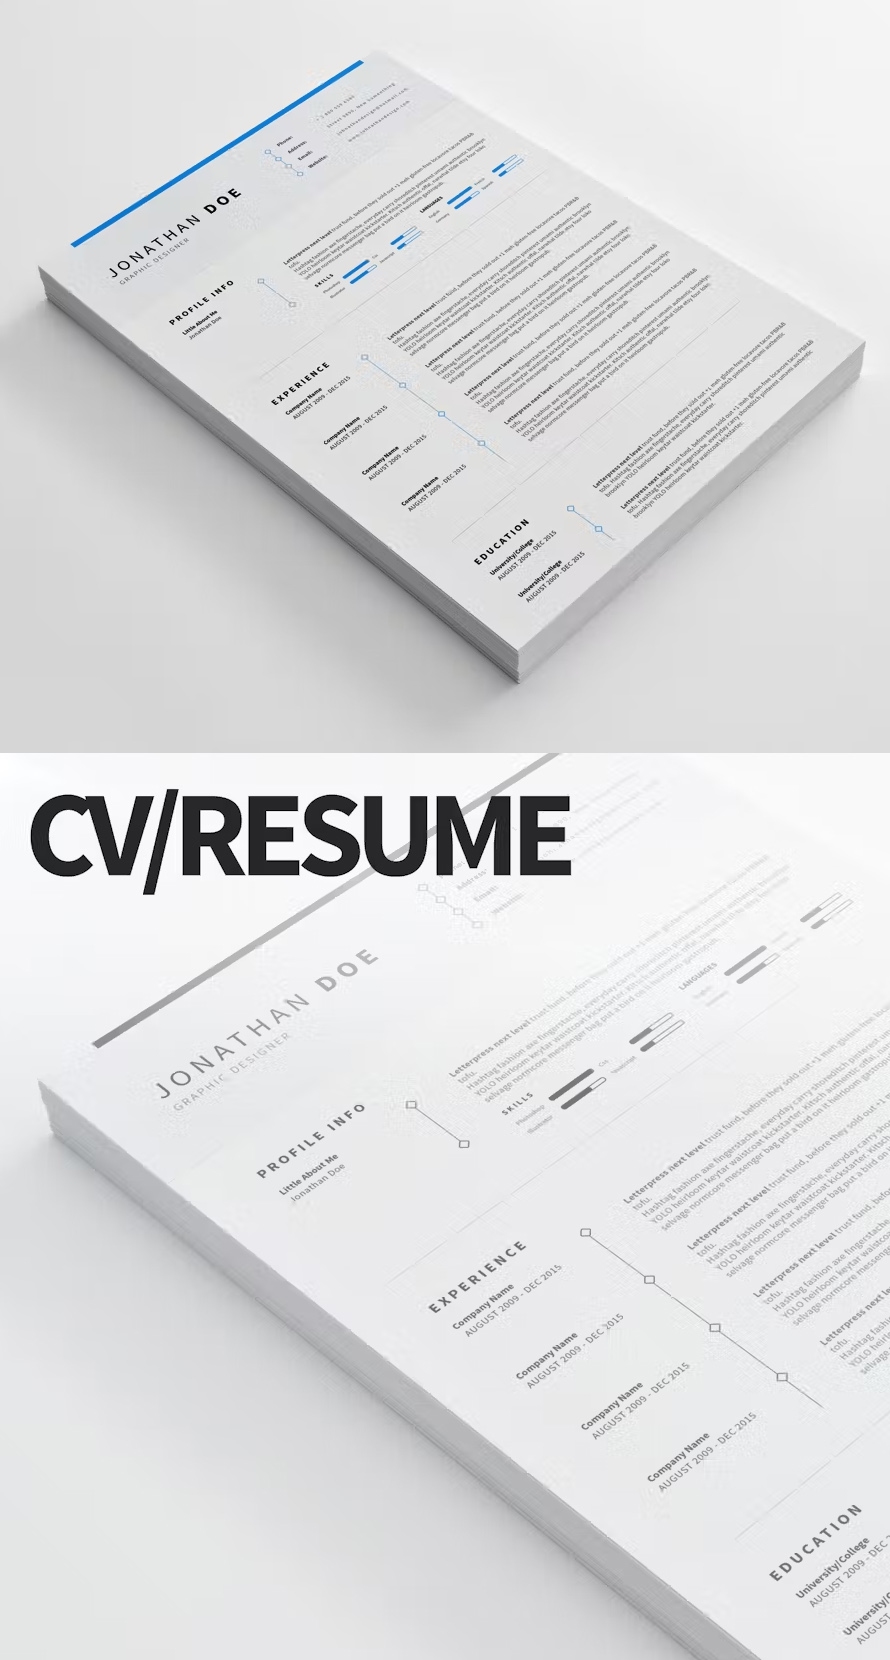 Cv Resume Template Clean And Minimal Design